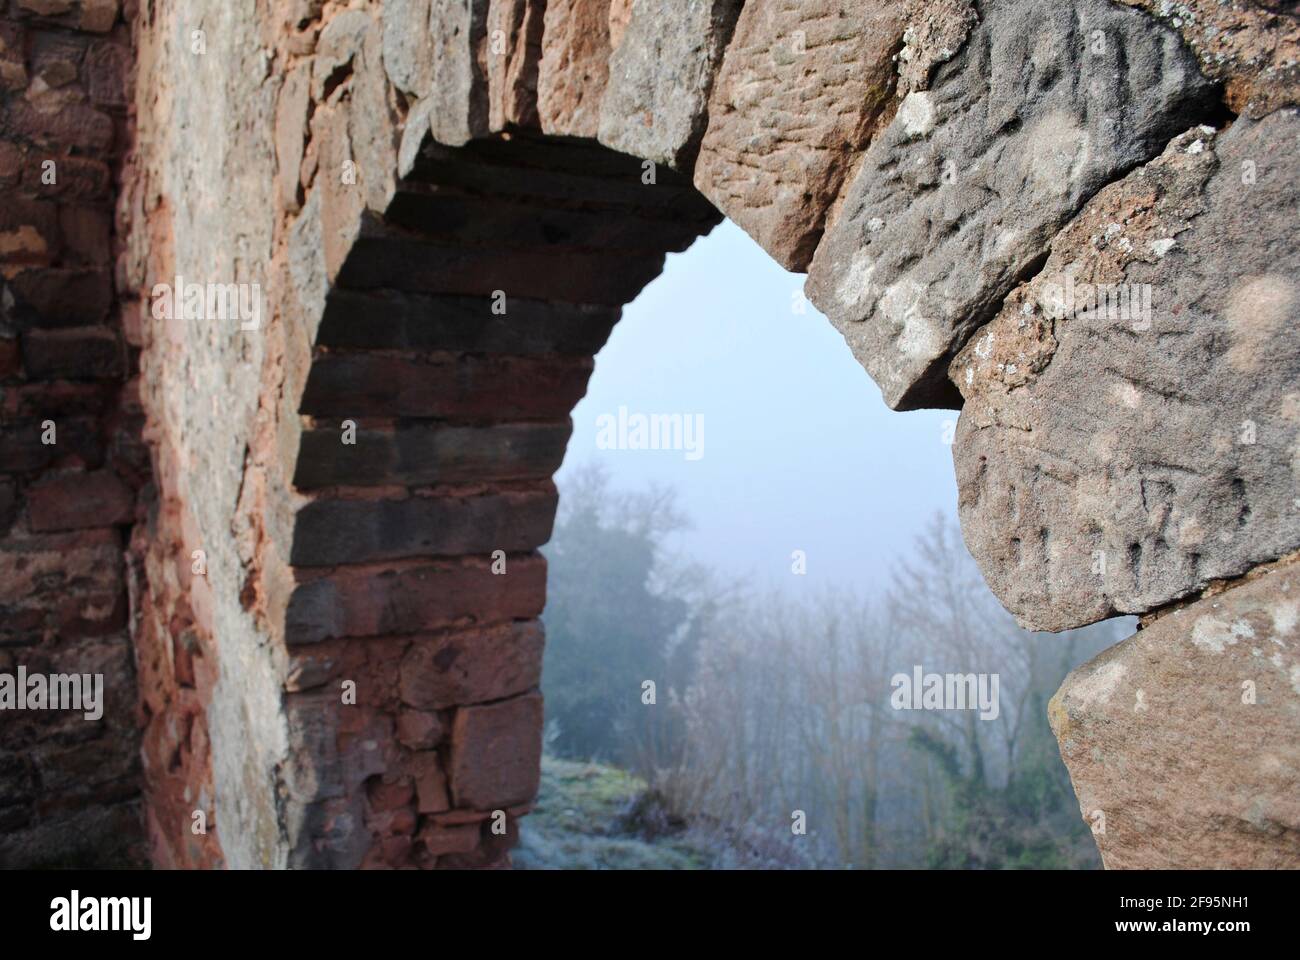 LANDSTUHL, GERMANY: Burg Nanstein (Nanstein Castle) in Landstuhl, Germany on a foggy, misty morning. A stone arch with view of the surrounding forest. Stock Photo